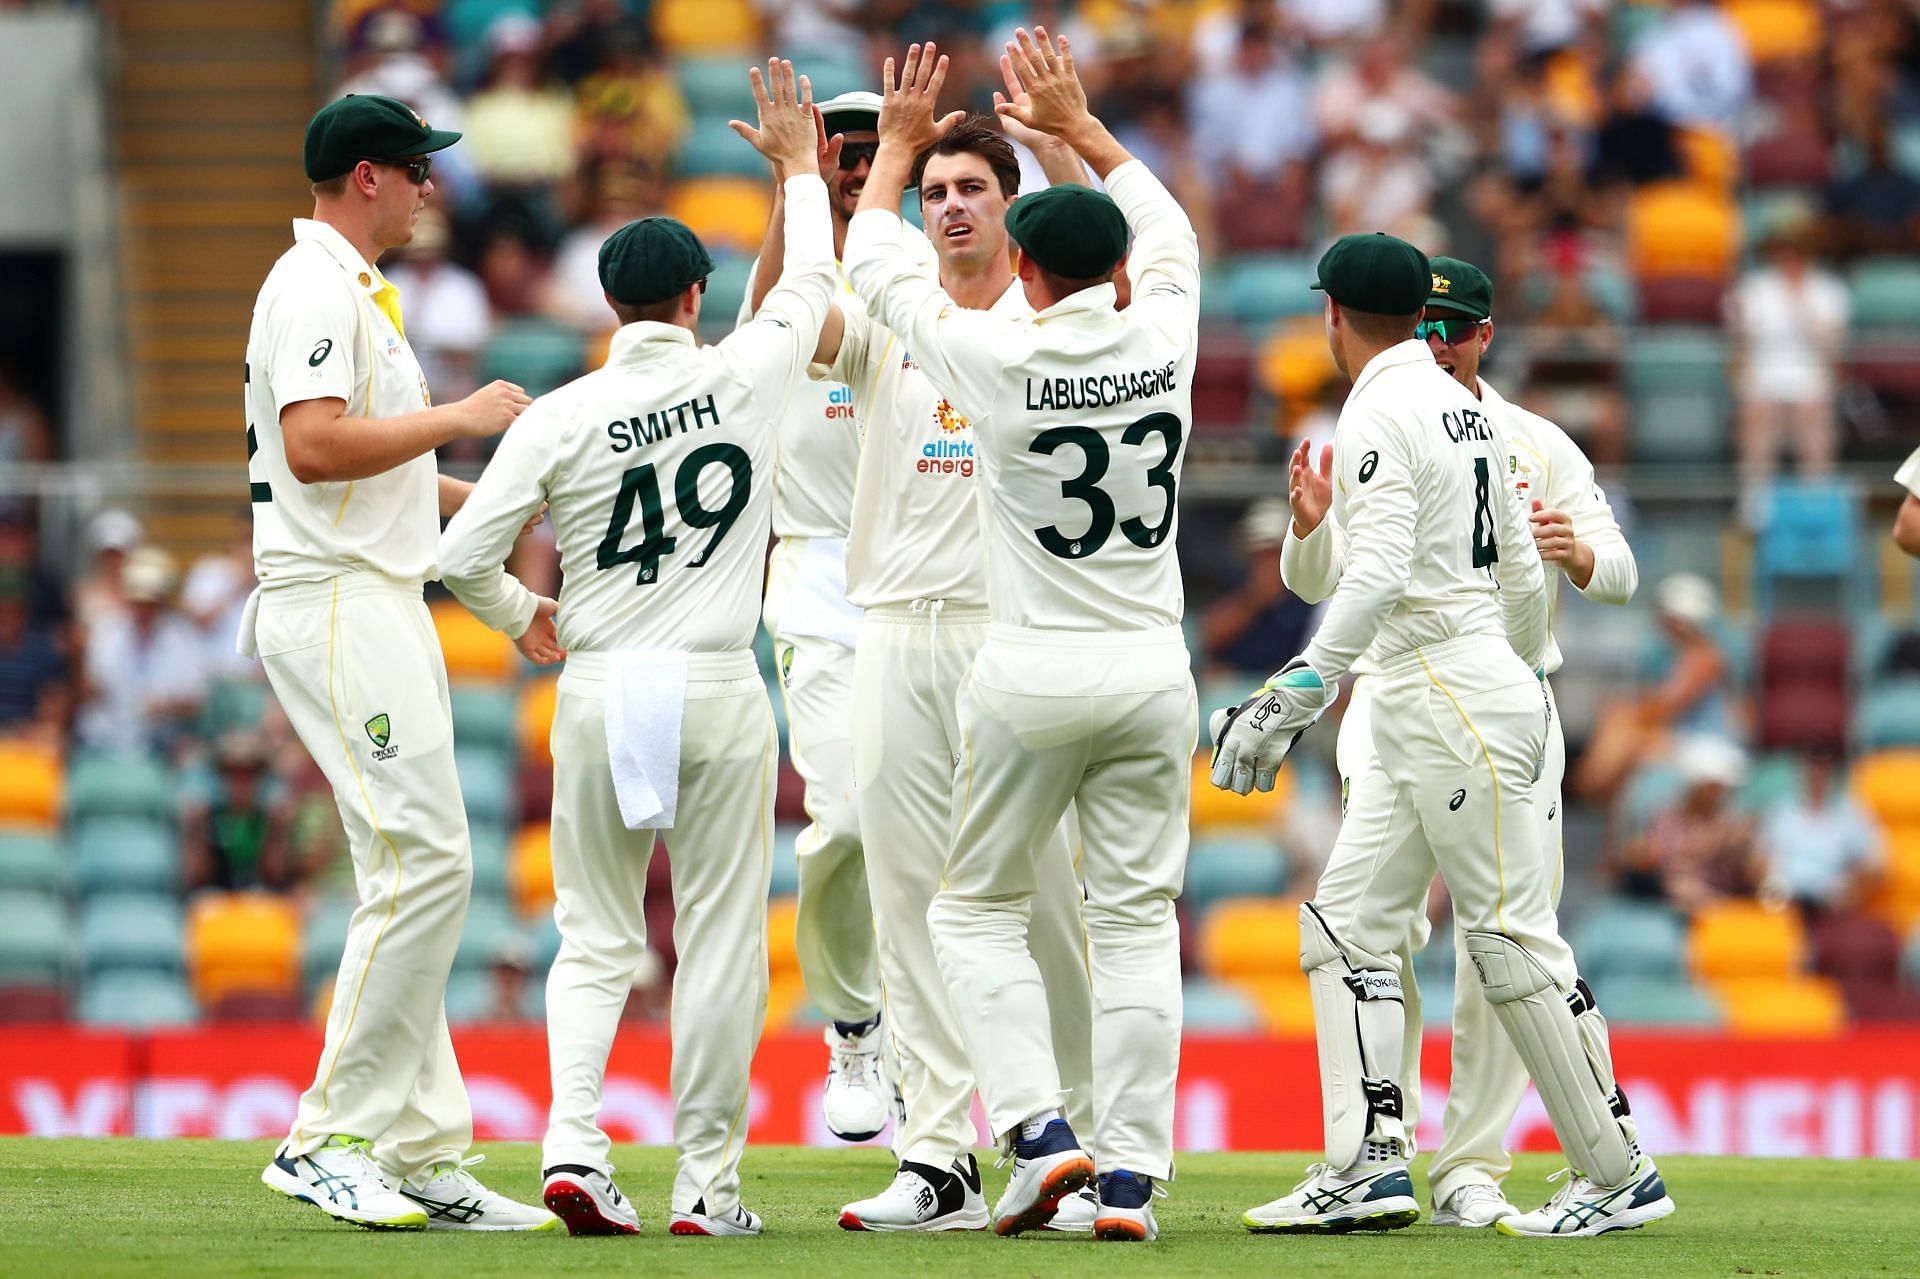 Pat Cummins celebrates with his team after taking the wicket of Rory Burns. Pic: Getty Images